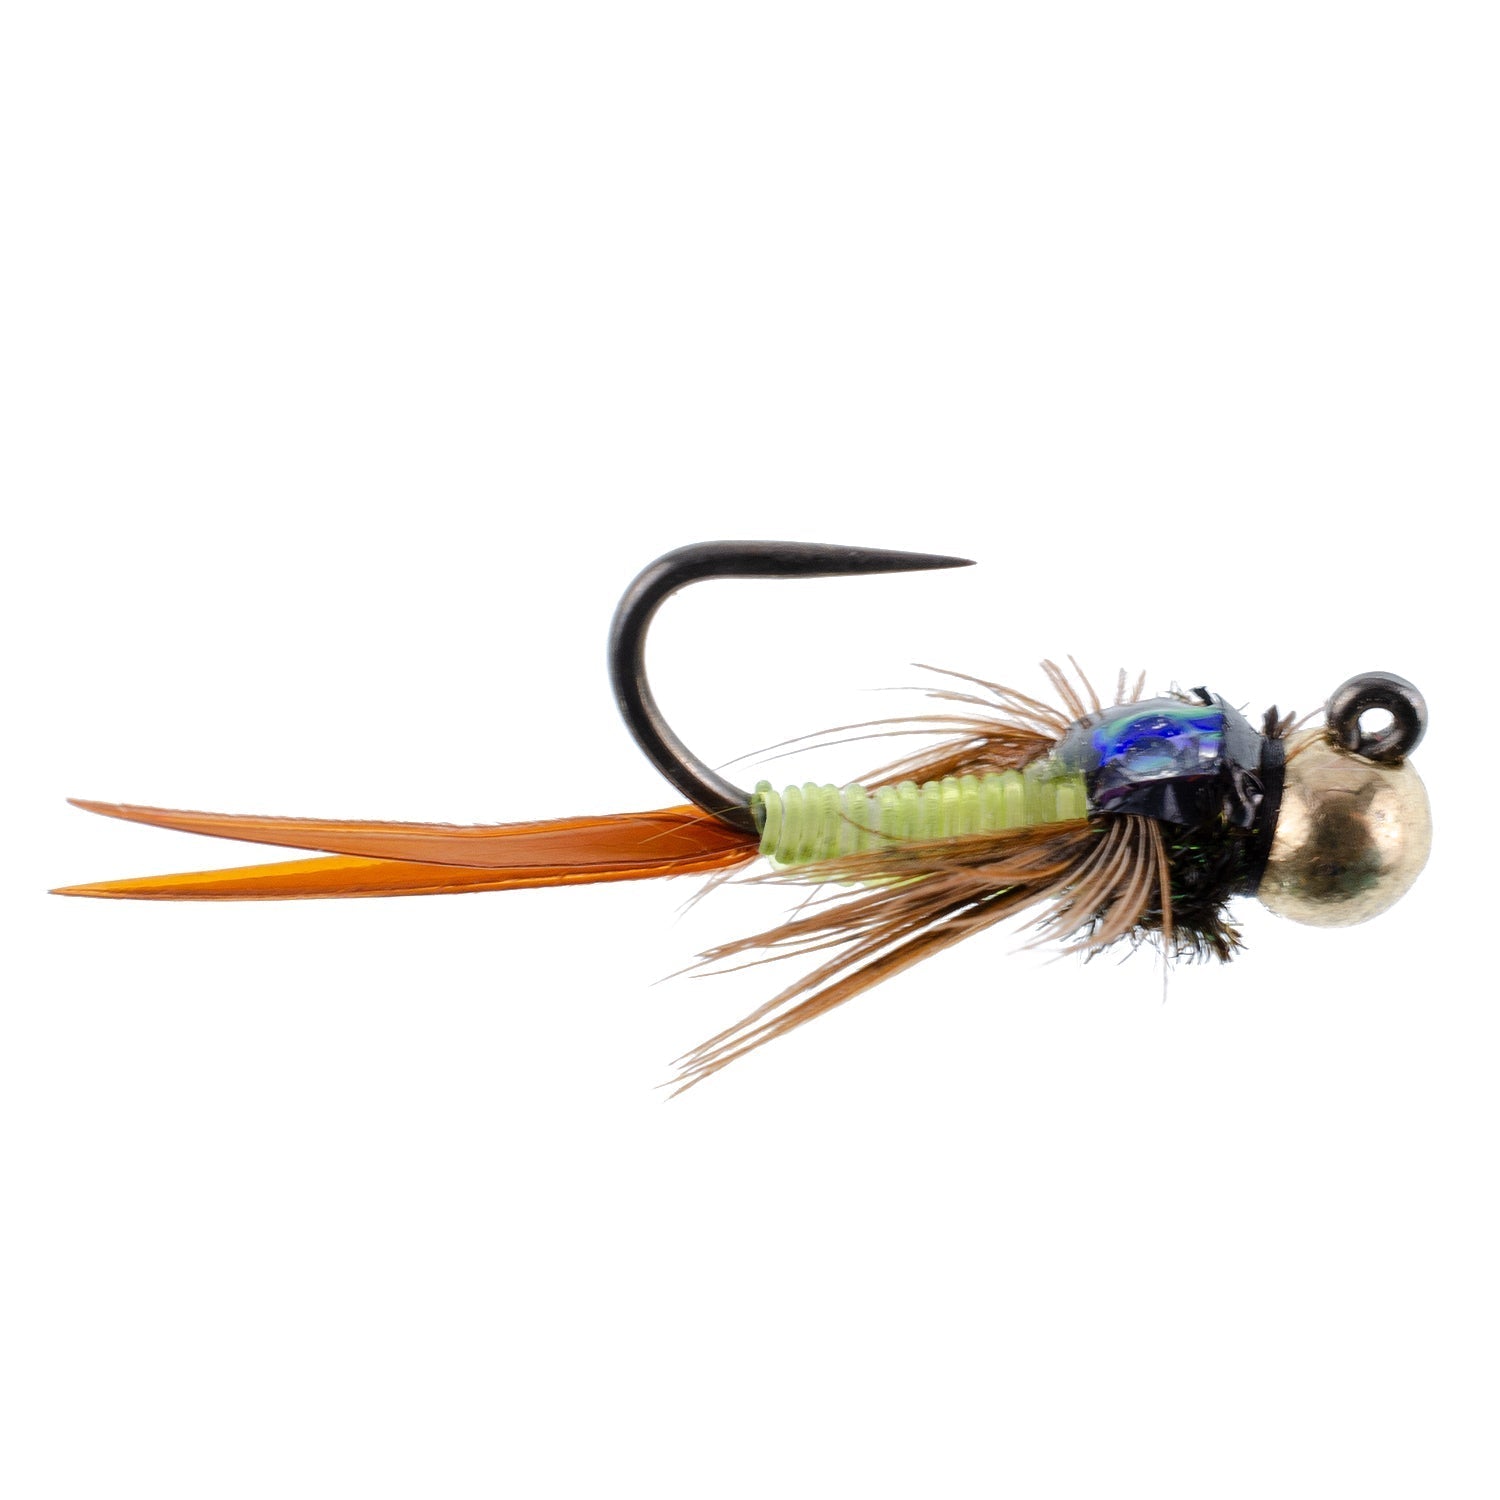 3 Pack Tungsten Bead Tactical Jig Copper John Chartreuse Czech Nymph Euro Nymphing Fly - Size 14